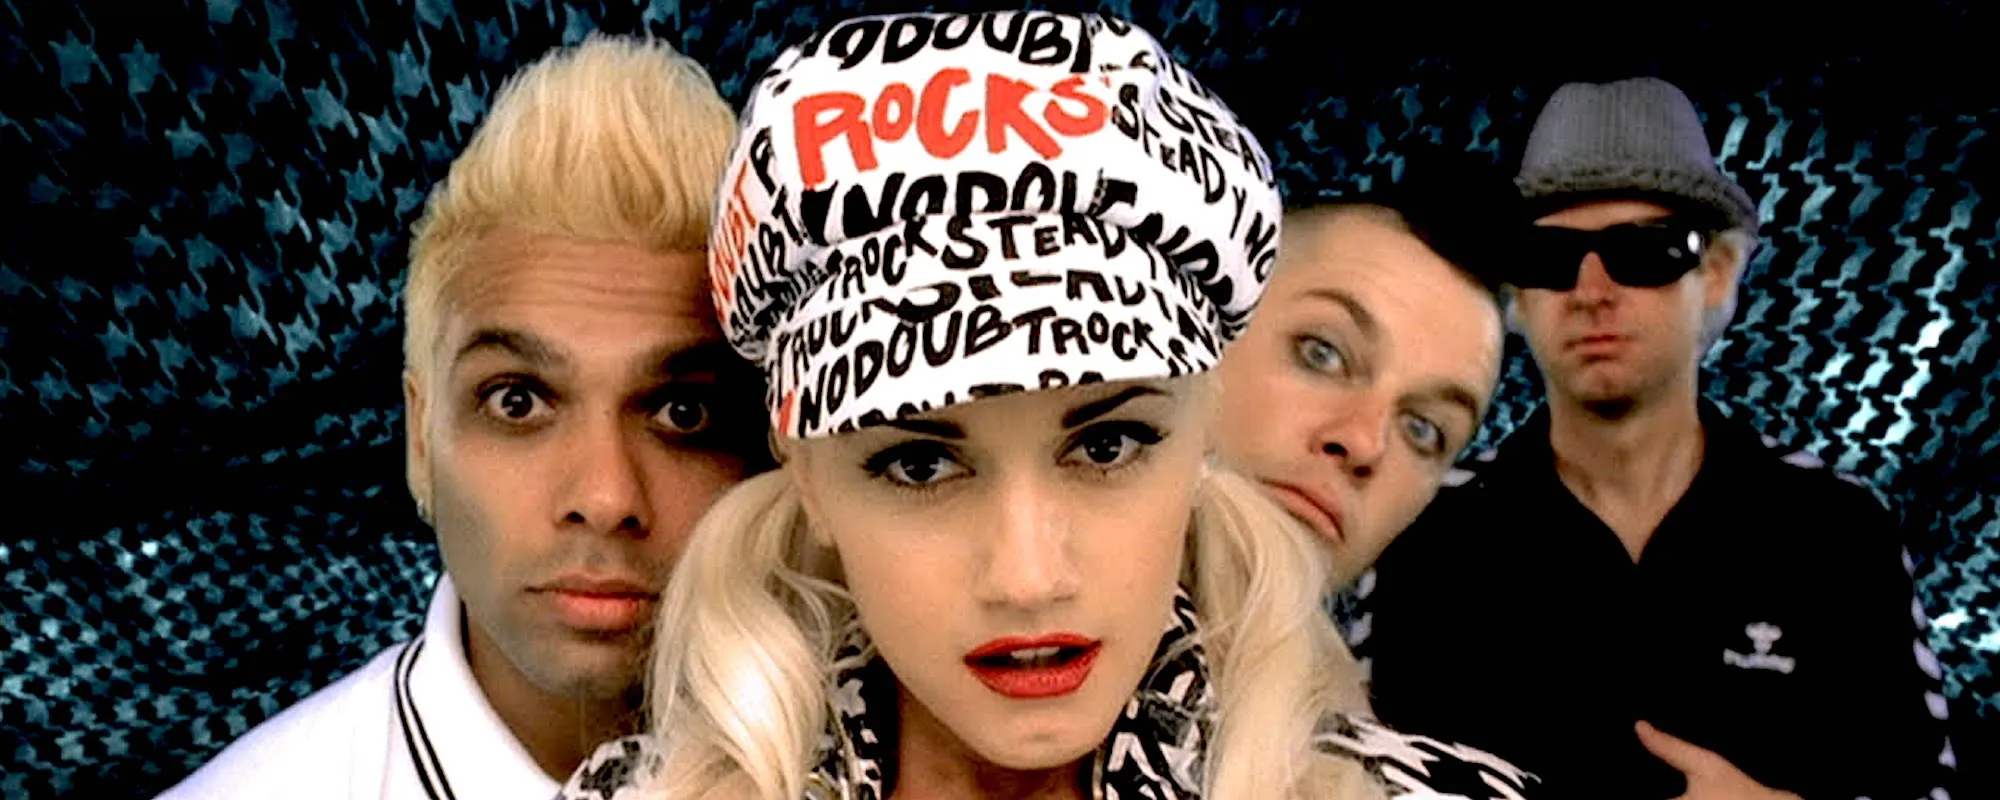 Behind the Band Name: No Doubt